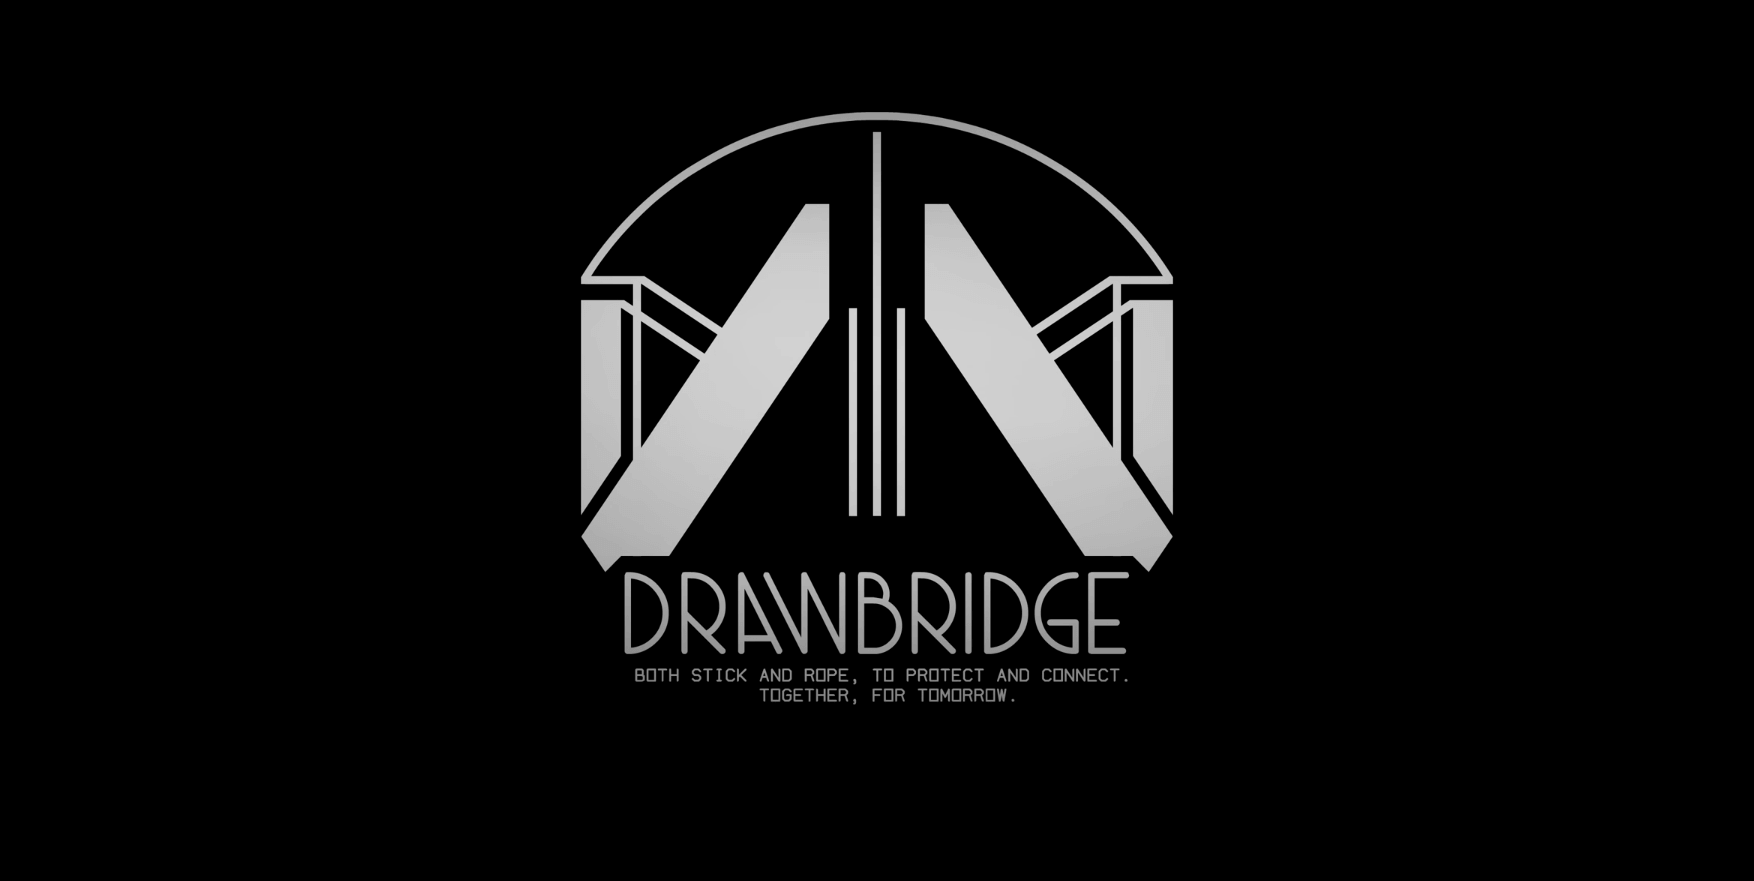 logo for fictional comapny Drawbridge in Death Stranding 2. The tagline reads: "Both stick and stone, to protect and connect, together, for tomorrow."